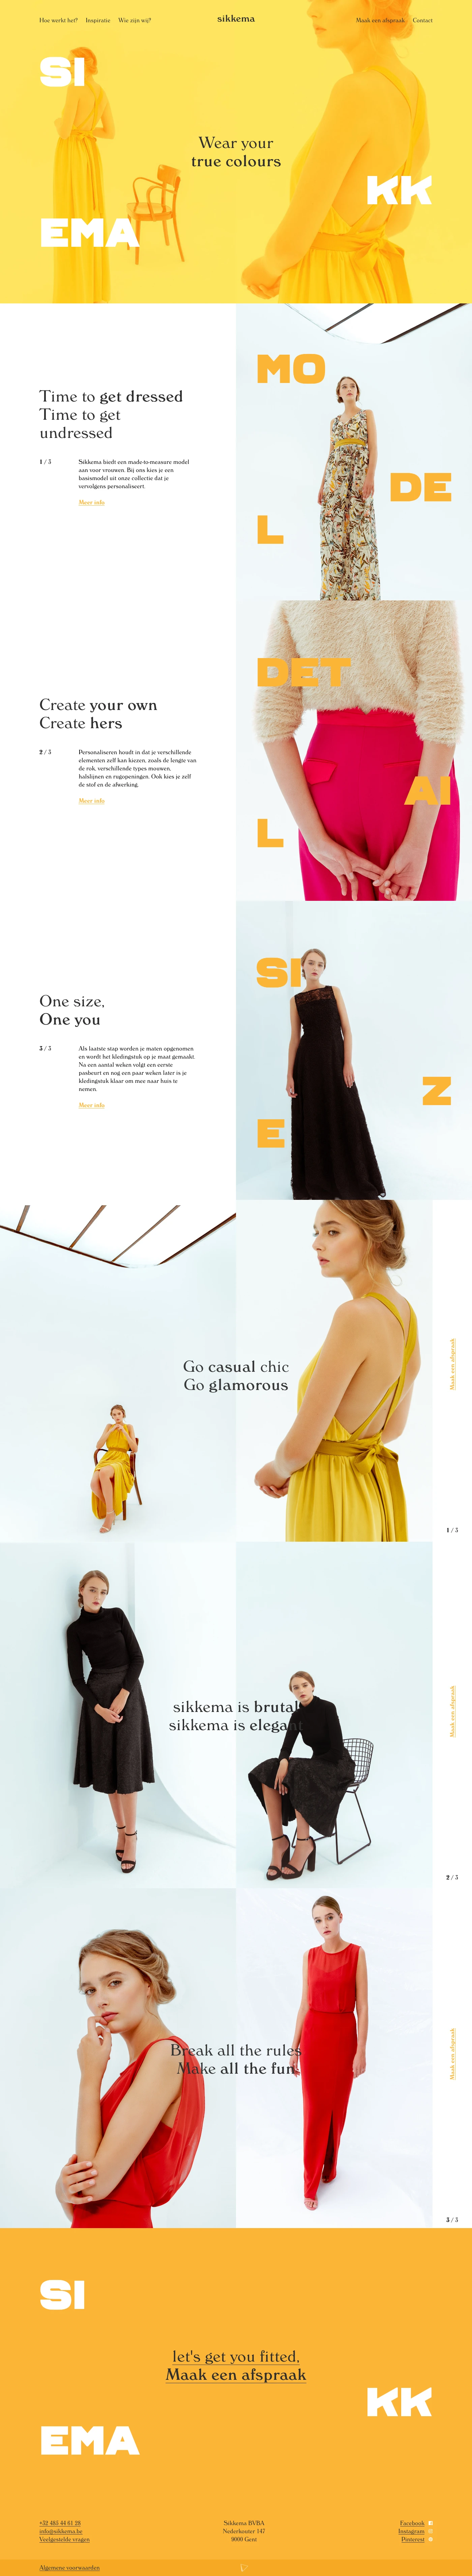 sikkema Landing Page Example: Made to measure clothing for every style and occasion. Designed & made in Belgium.